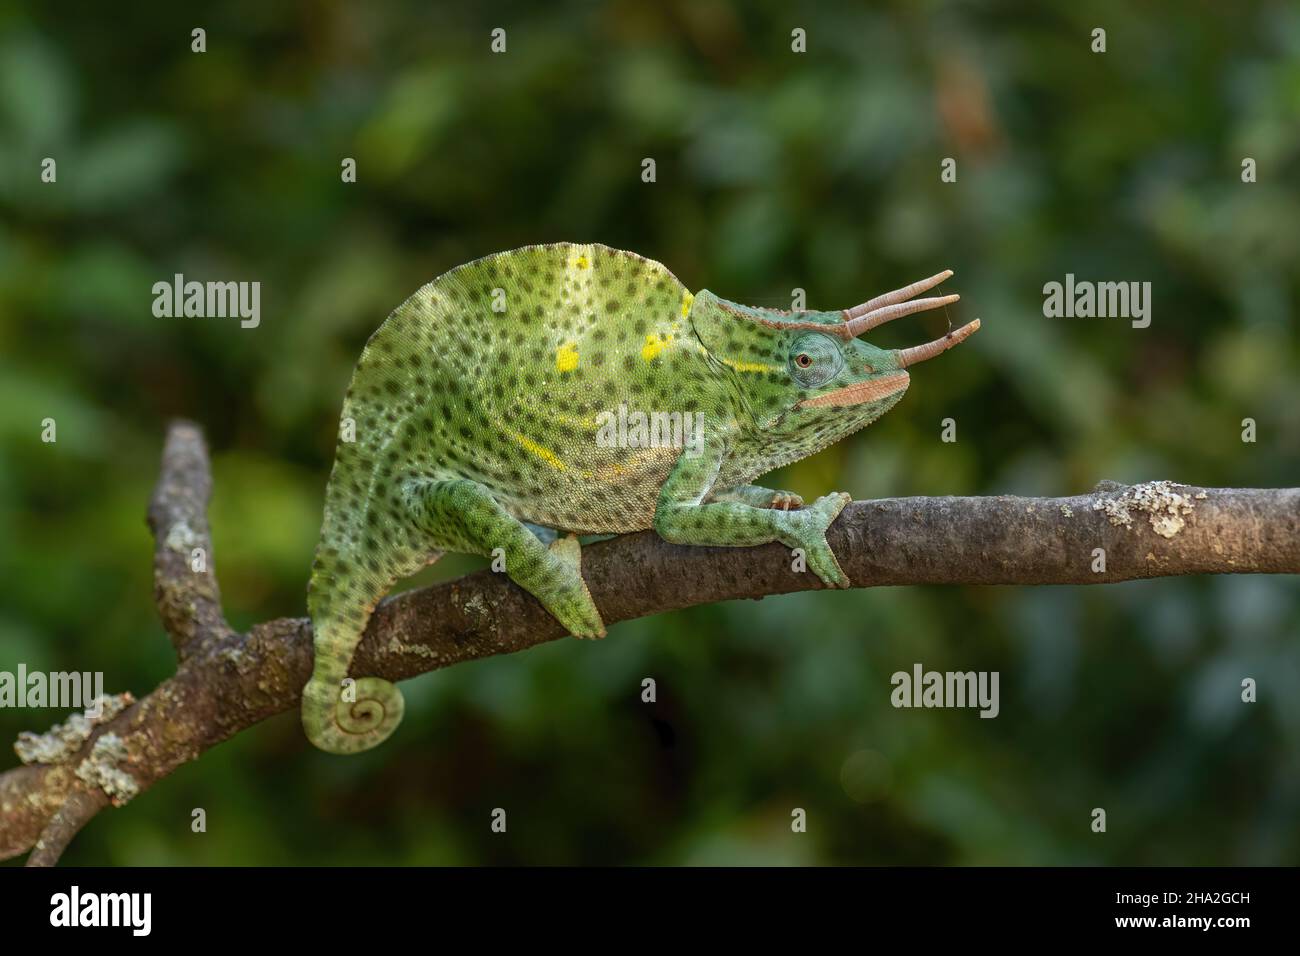 Usambara Three-horned Chameleon - Trioceros deremensis, beautiful special lizard from African bushes and forests, Tanzania. Stock Photo